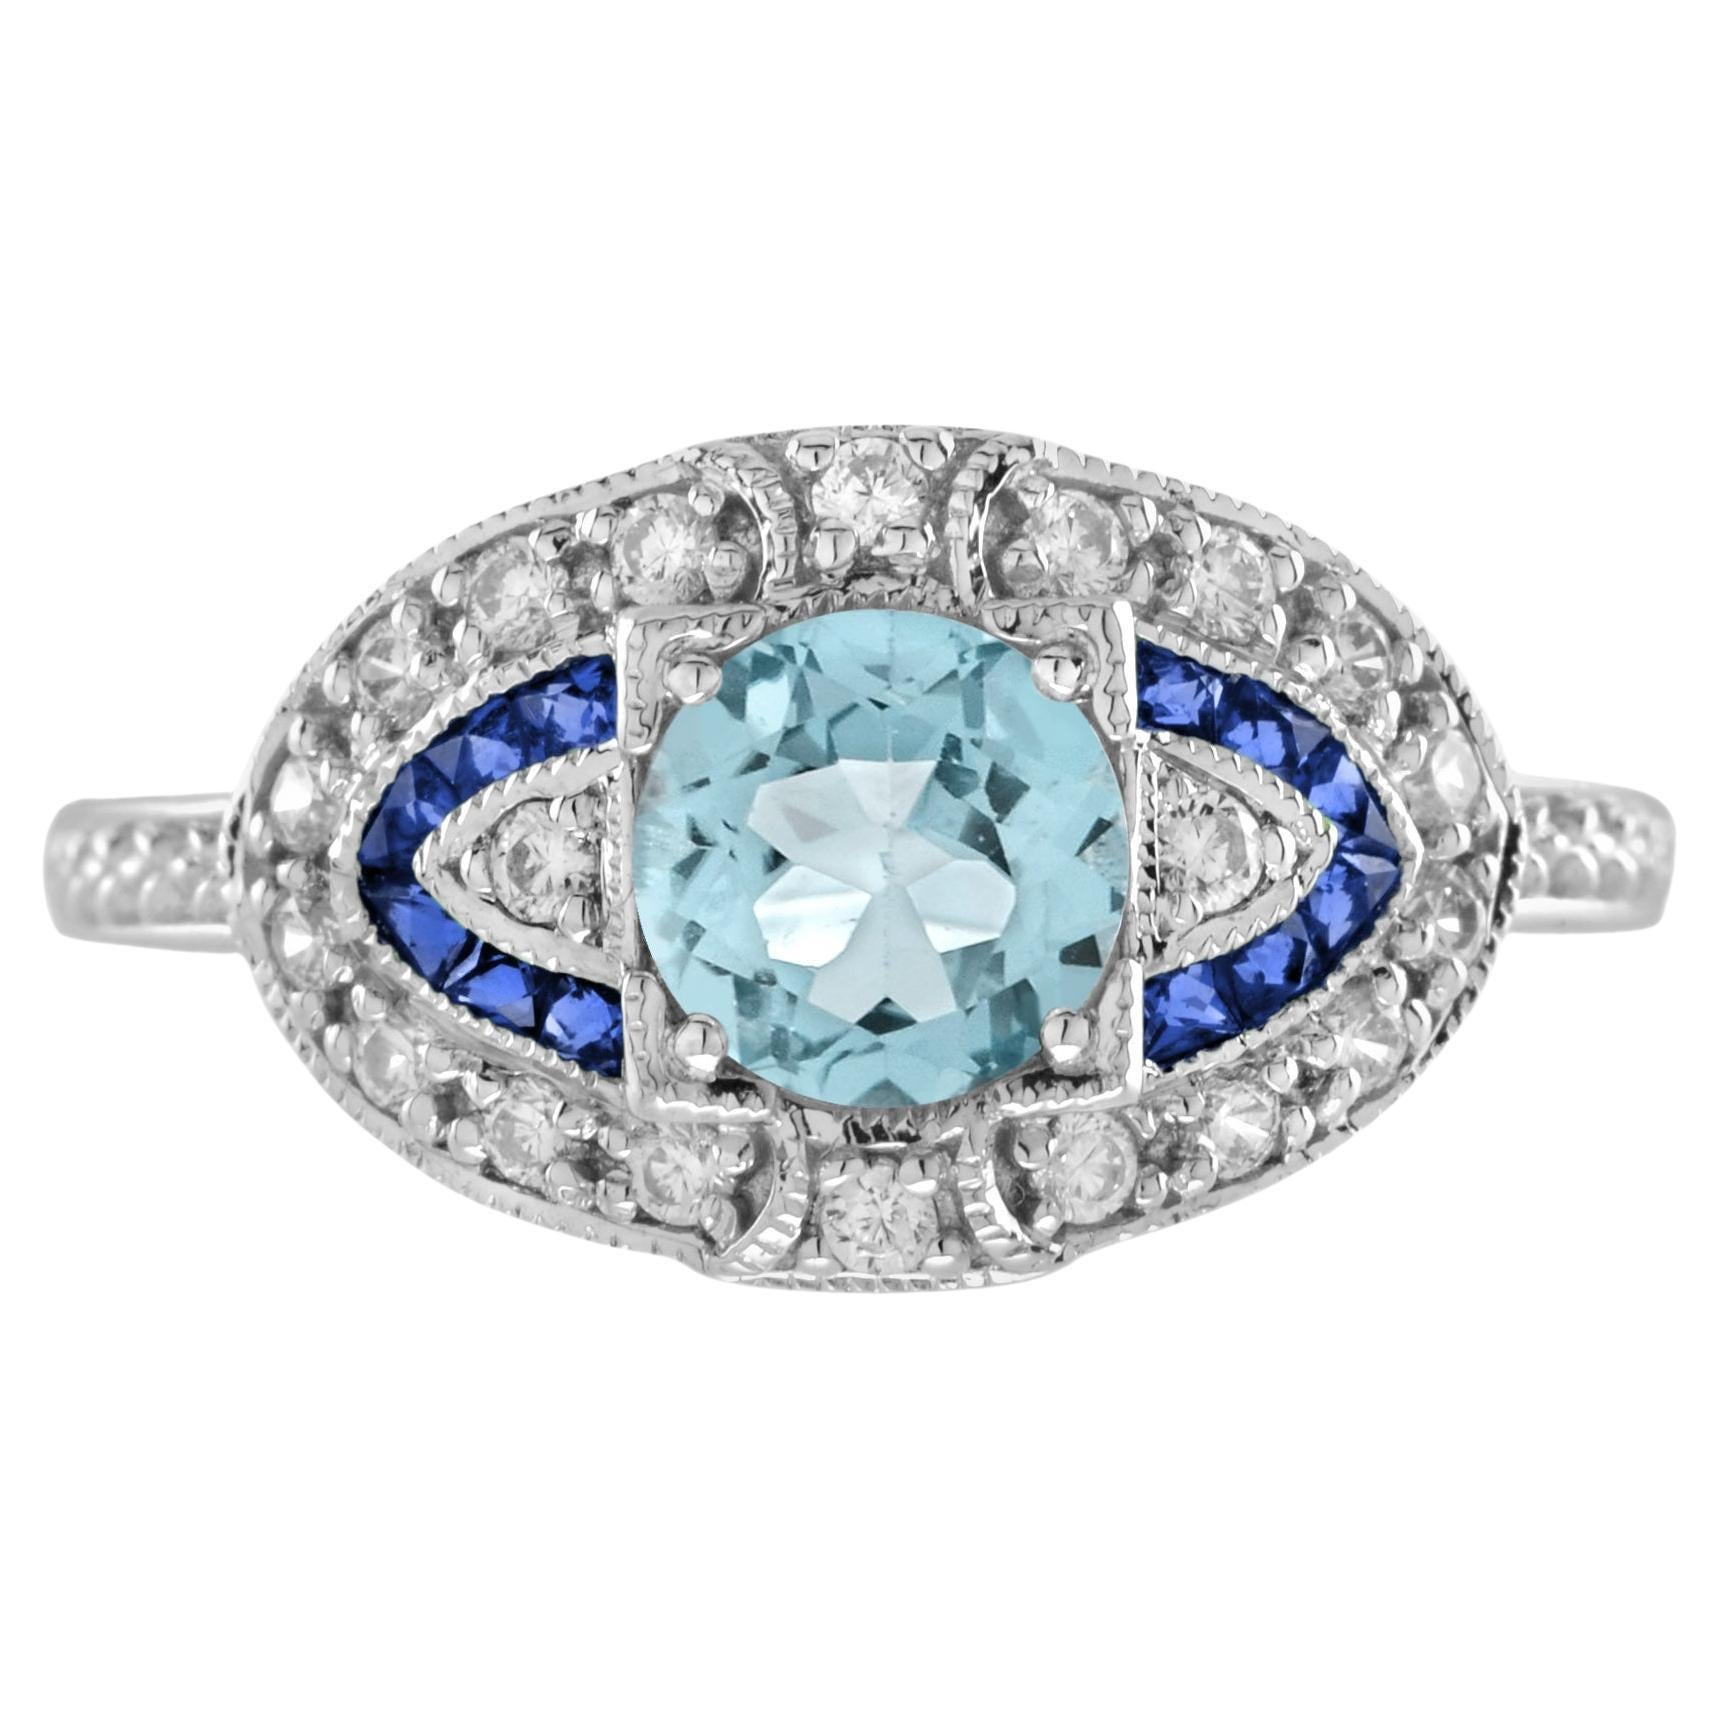 Aquamarine Sapphire Diamond Art Deco Style Engagement Ring in 18k White Gold For Sale